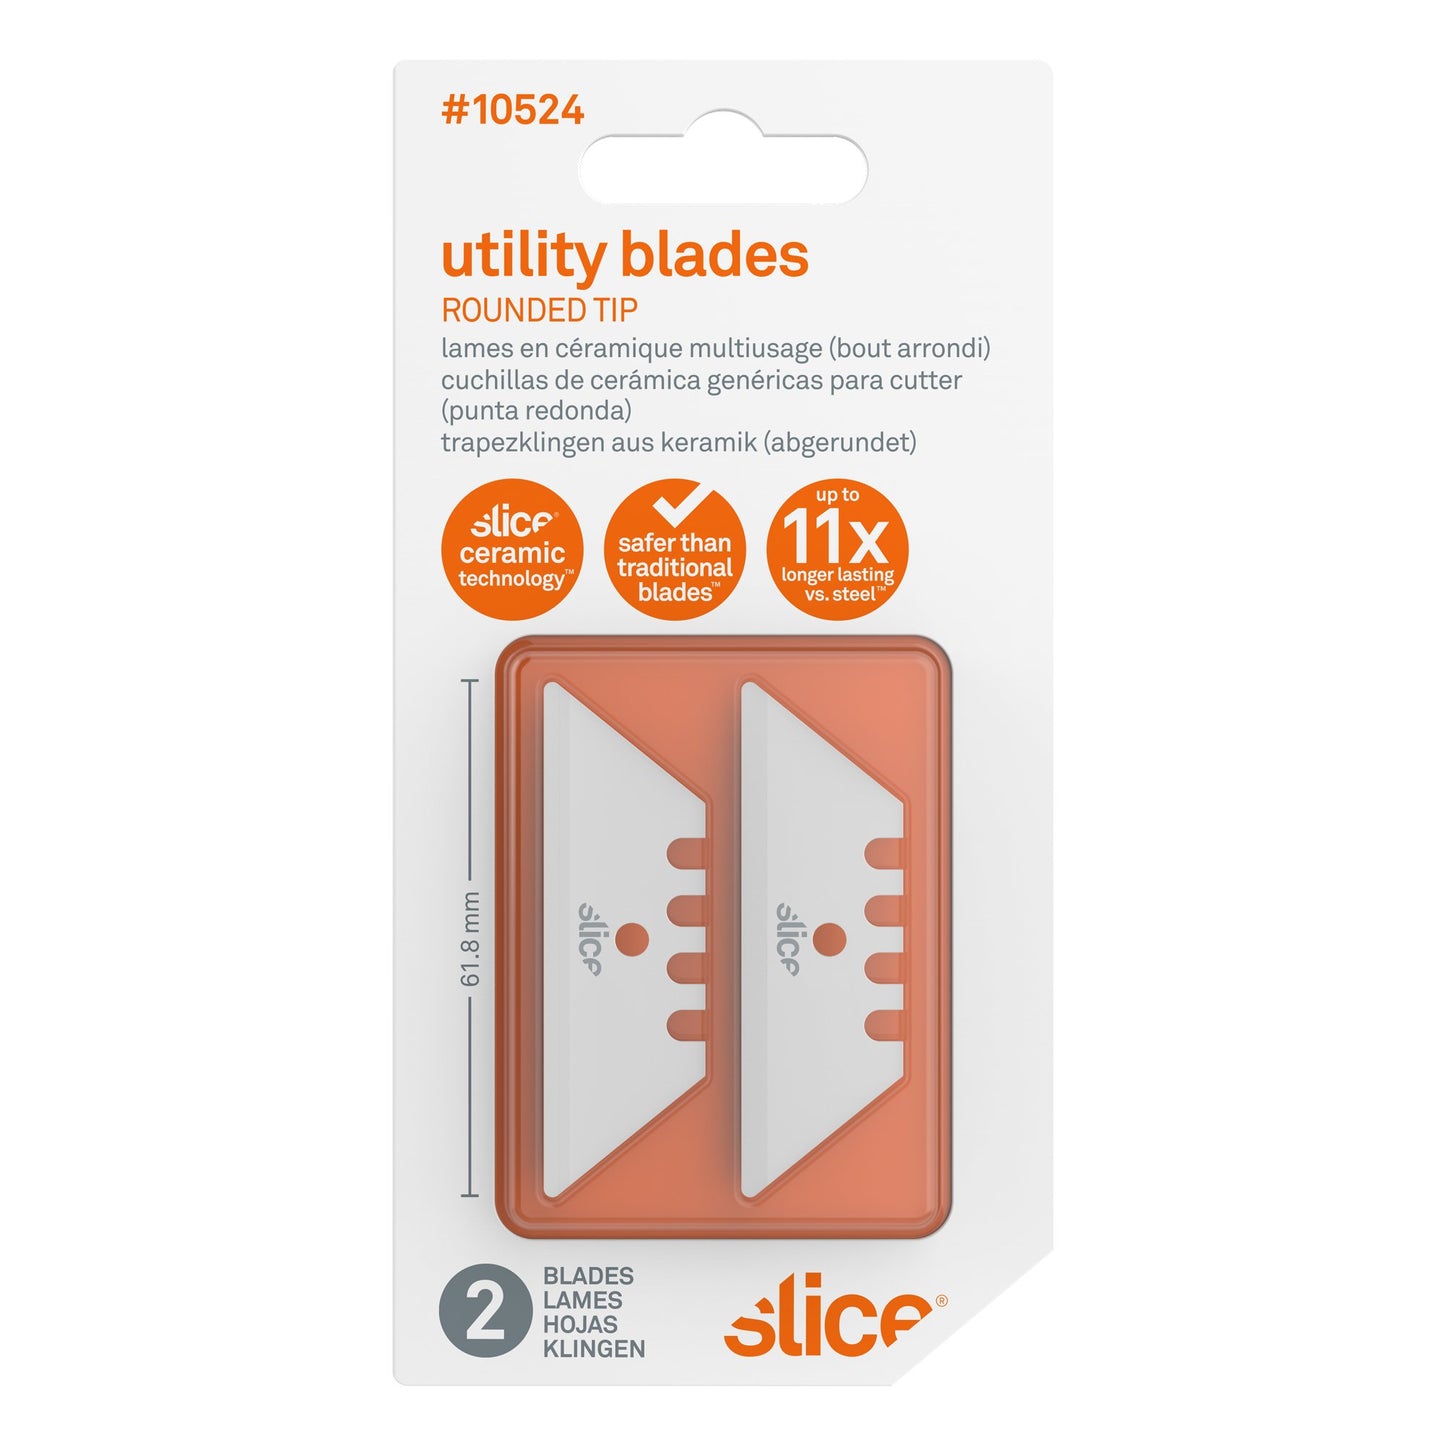 Utility Blades (Rounded Tip)